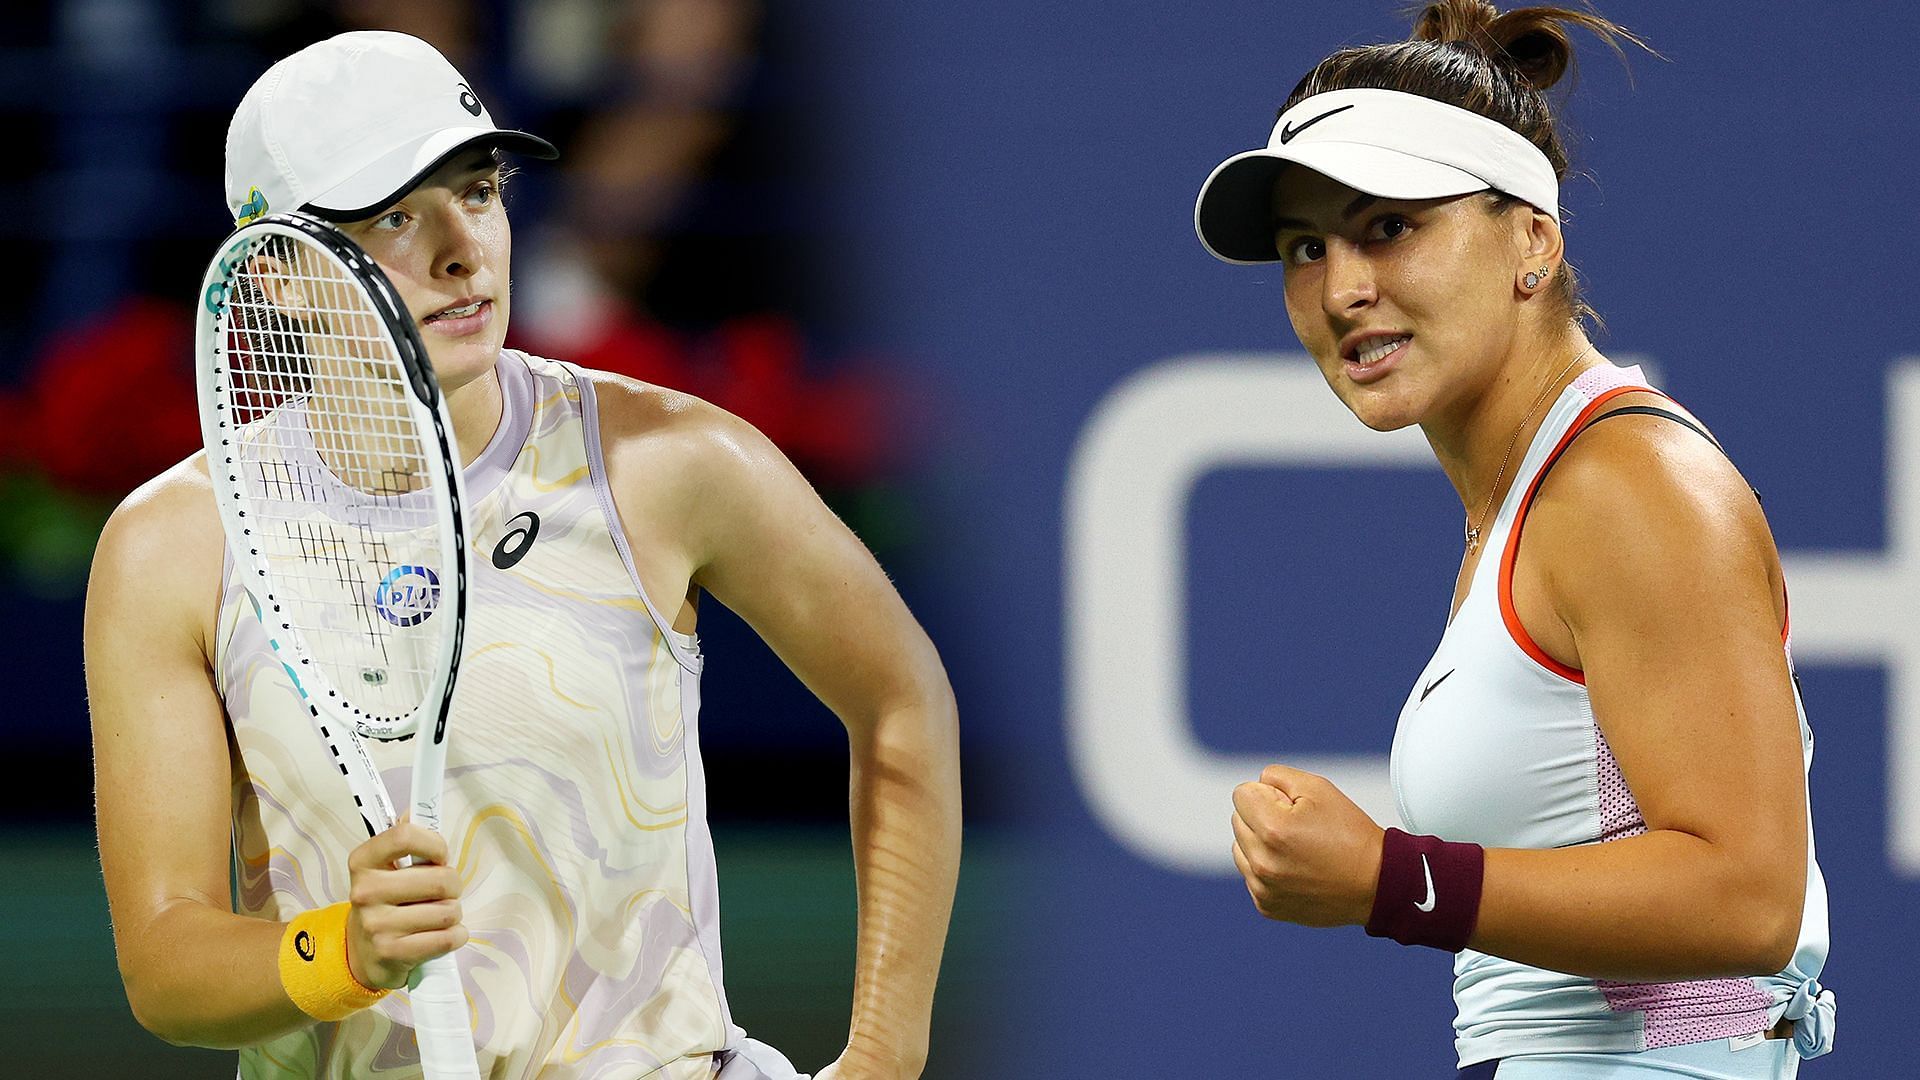 Iga Swiatek will face Bianca Andreescu in the third round of the BNP Paribas Open